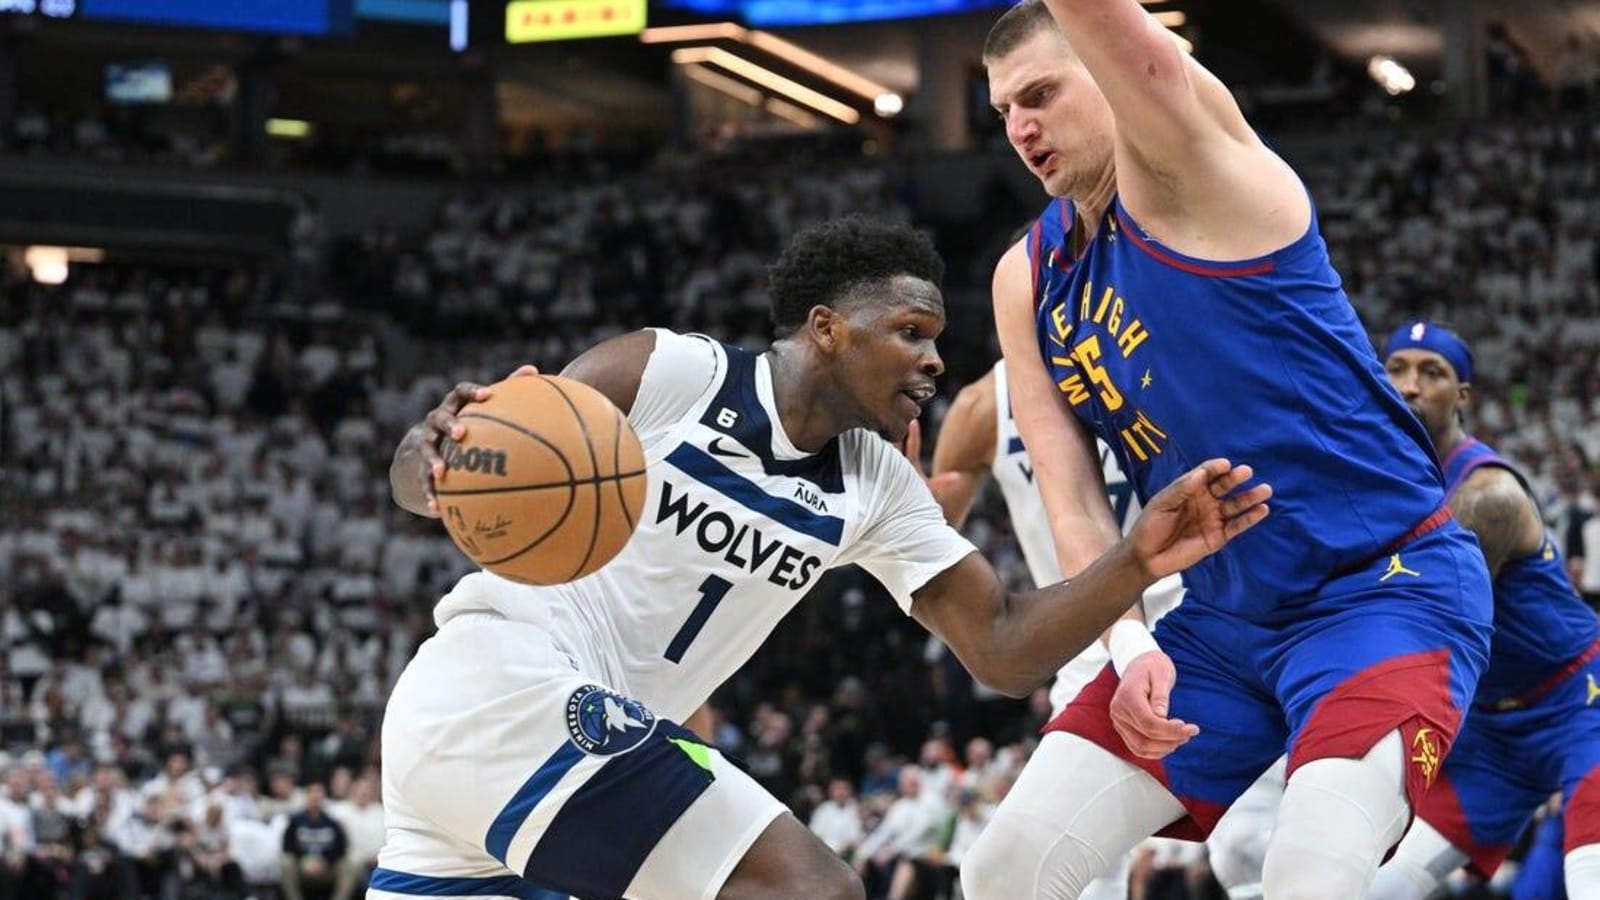 Minnesota Timberwolves at Denver Nuggets Game 5 prediction, pick for 4/25: Nuggets try to close out Wolves